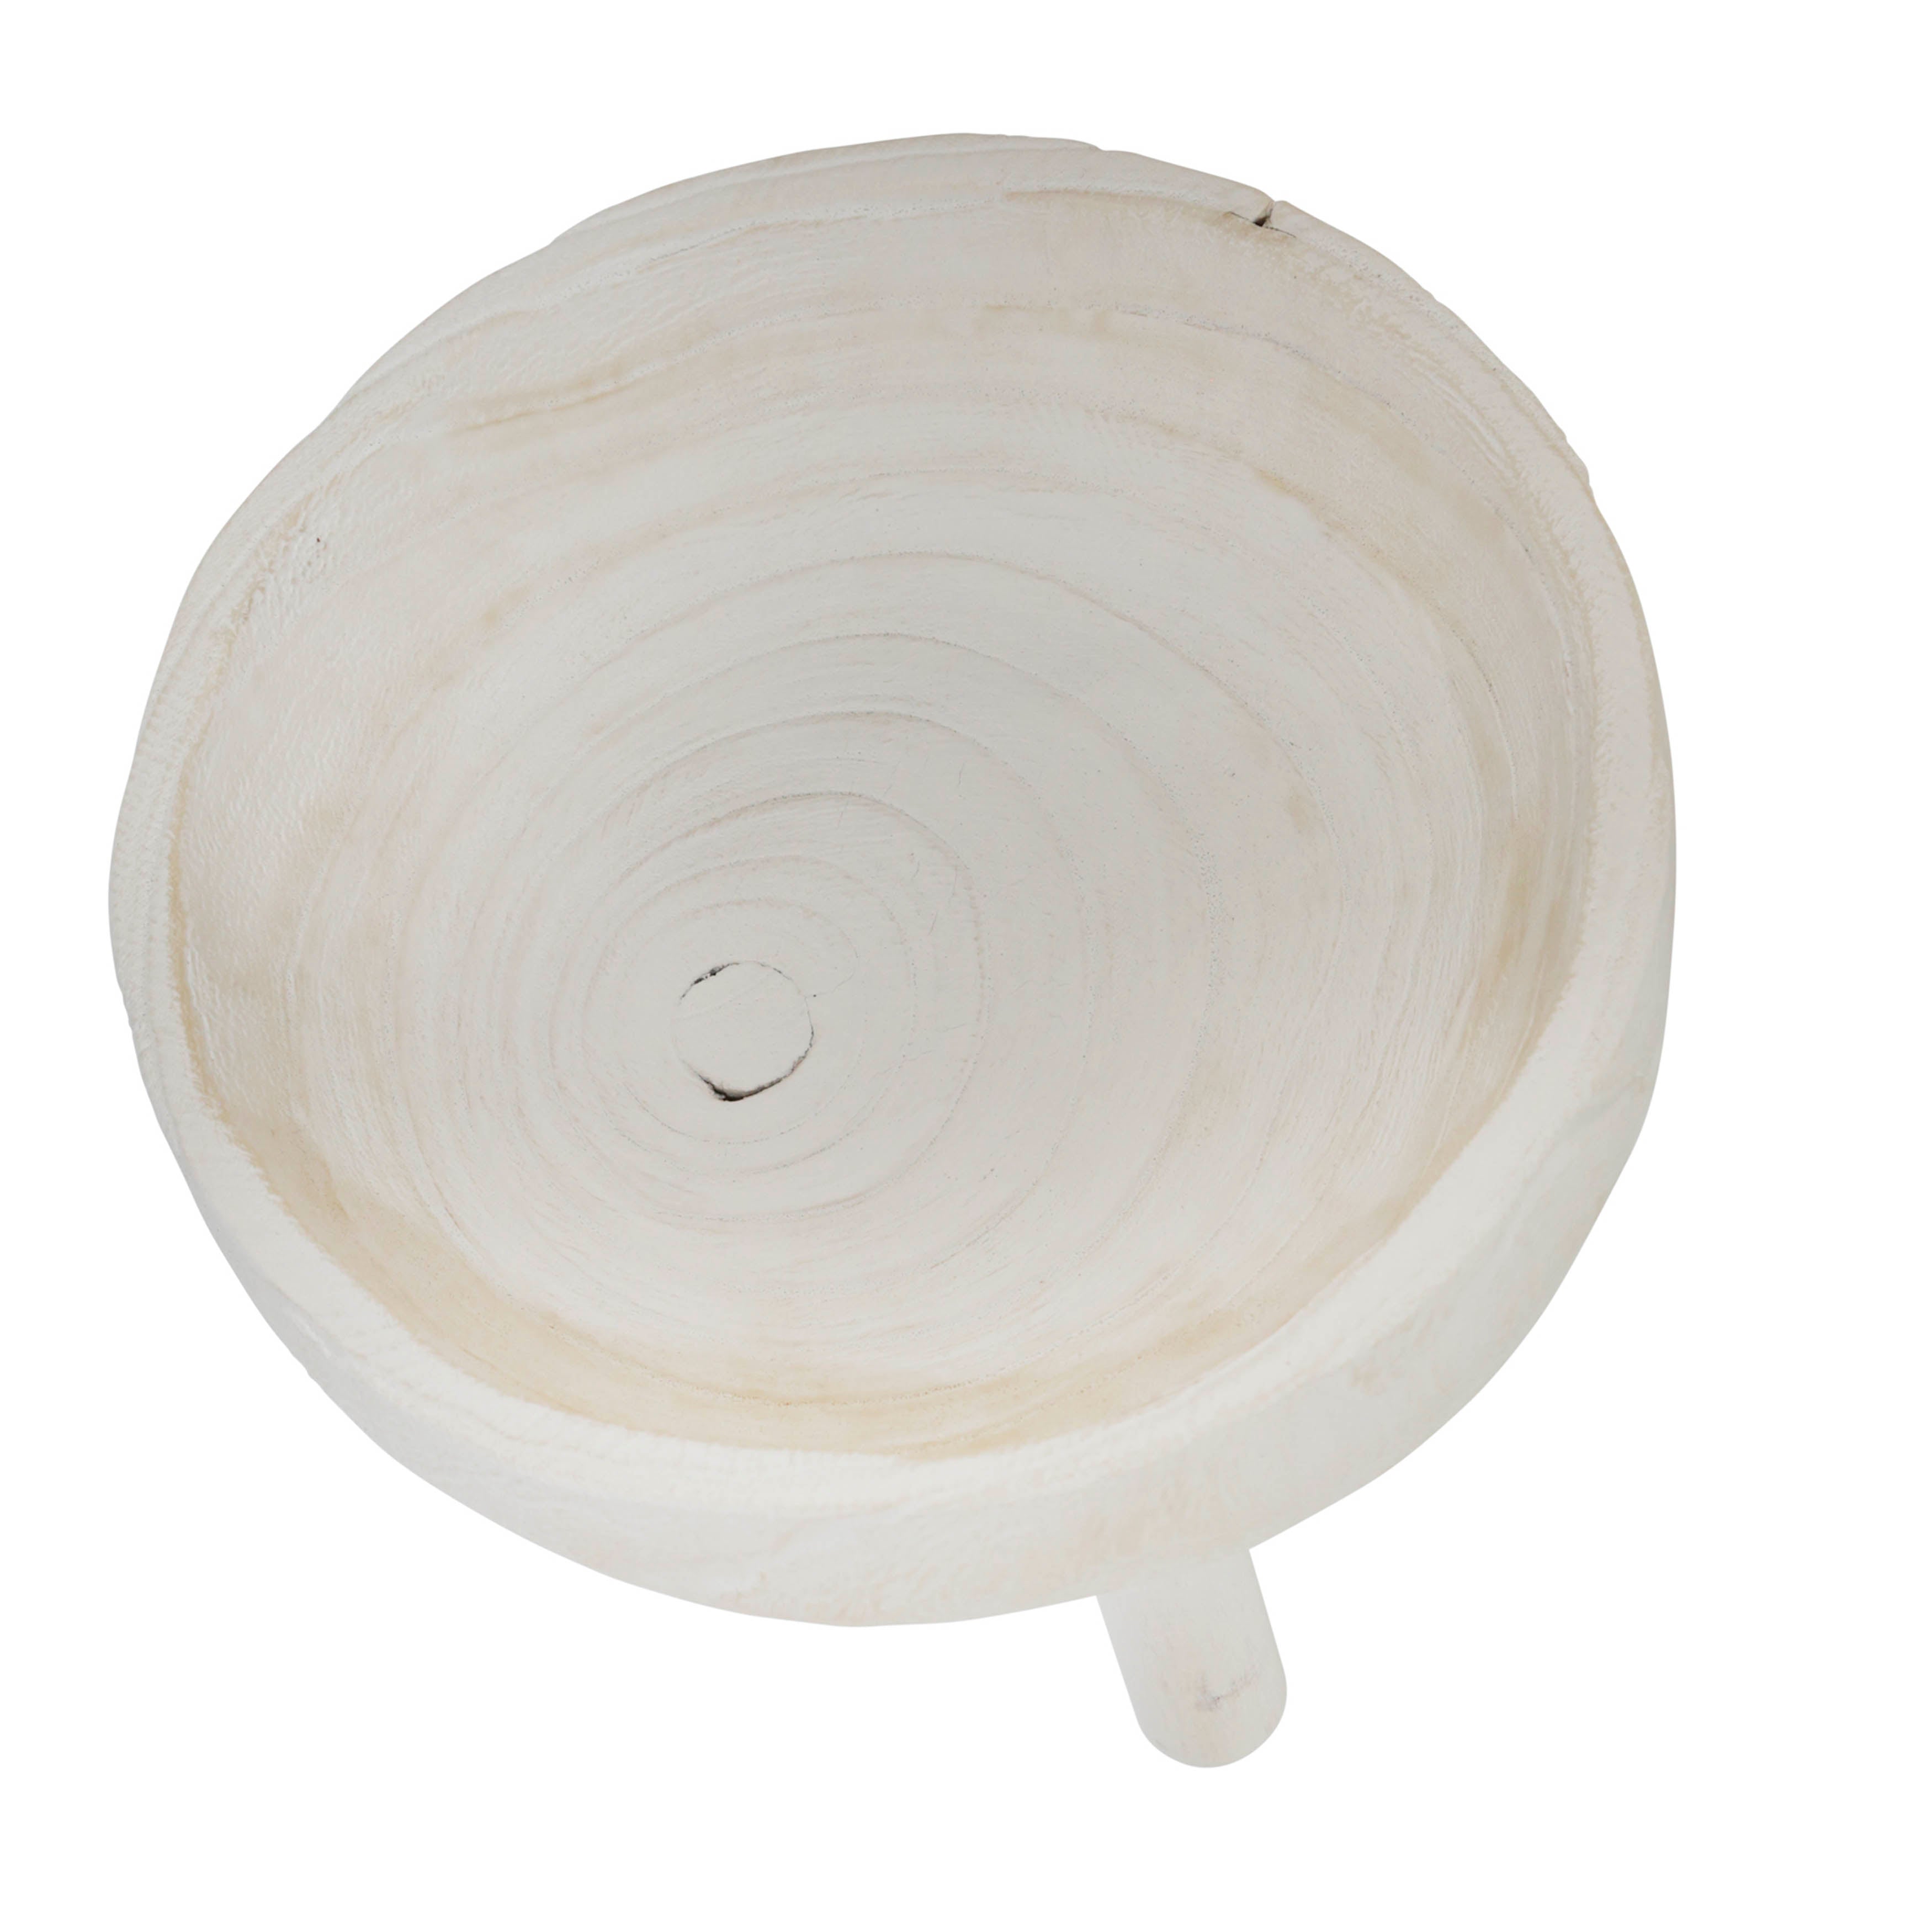 Wood Bowl With Legs - White